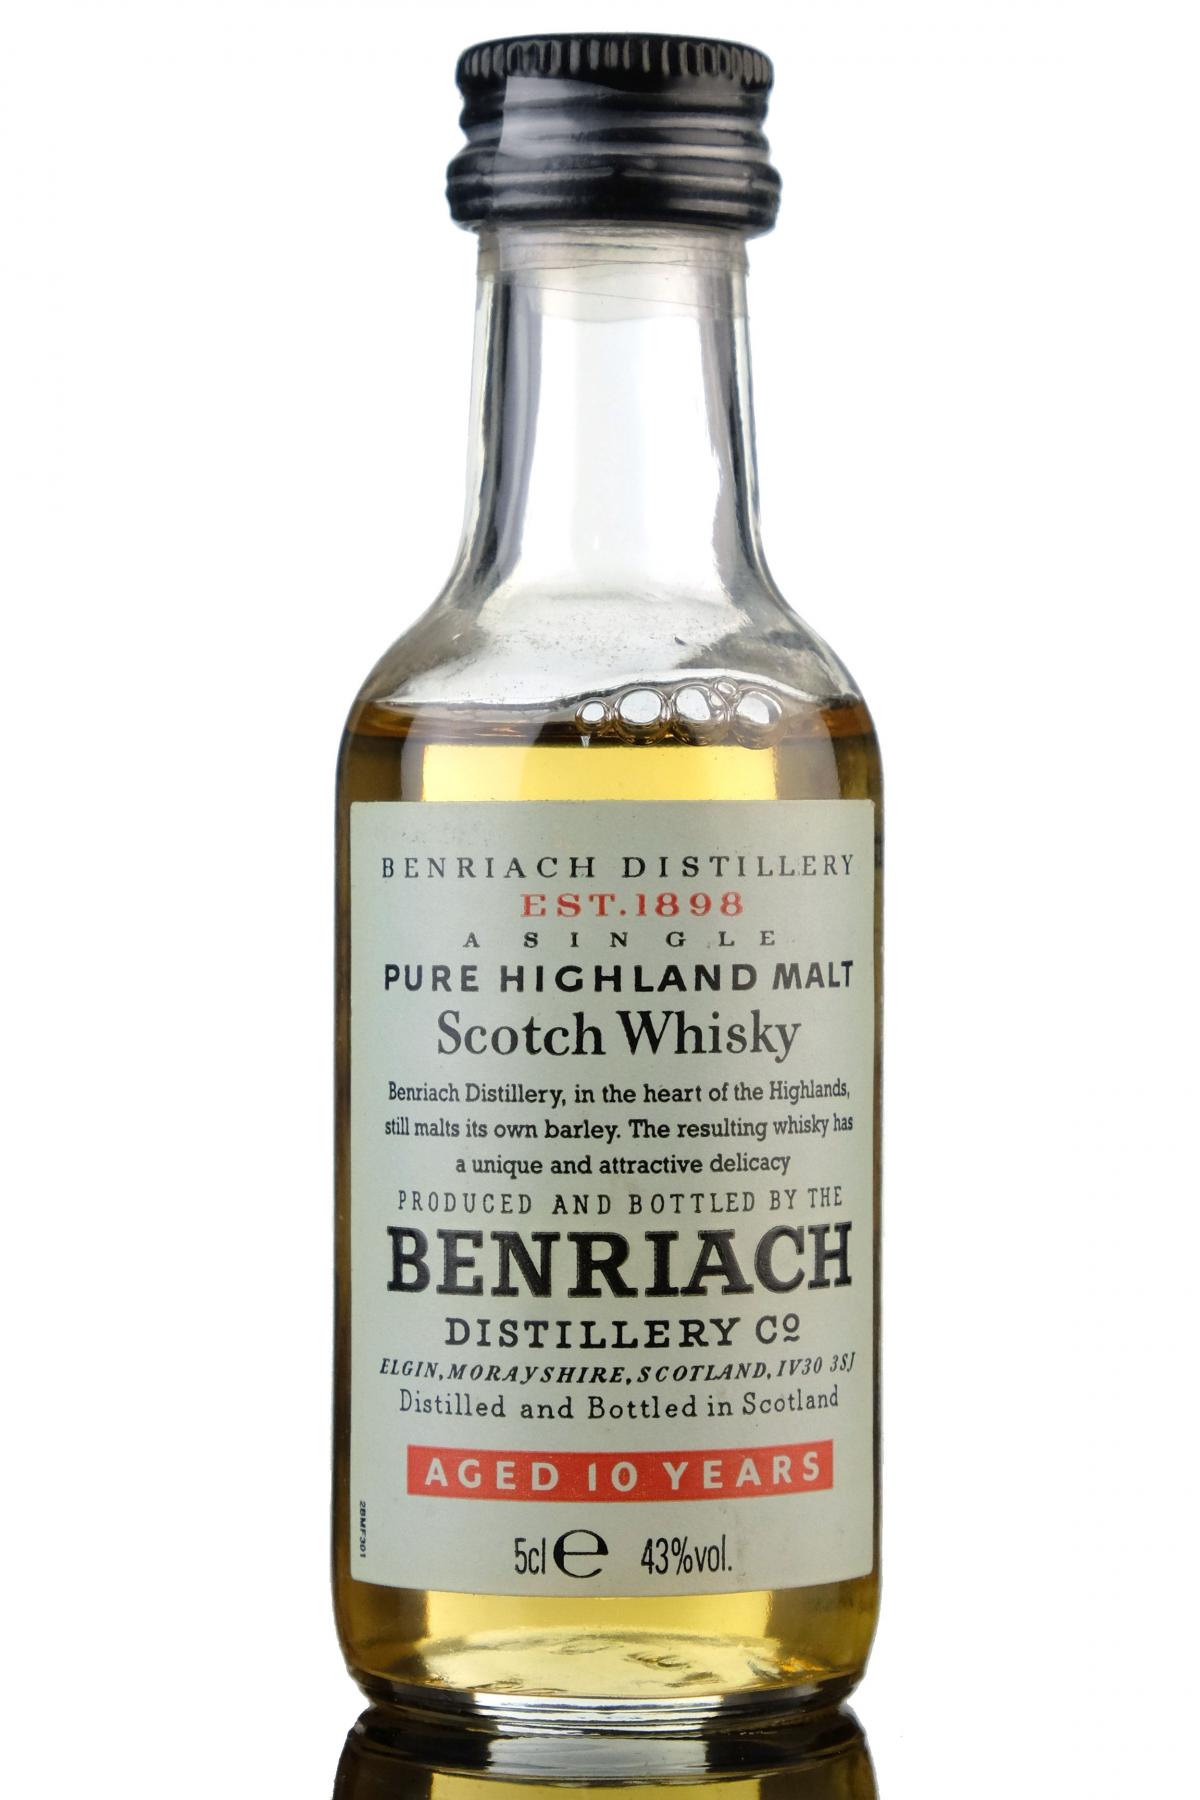 Benriach 10 Year Old Miniature